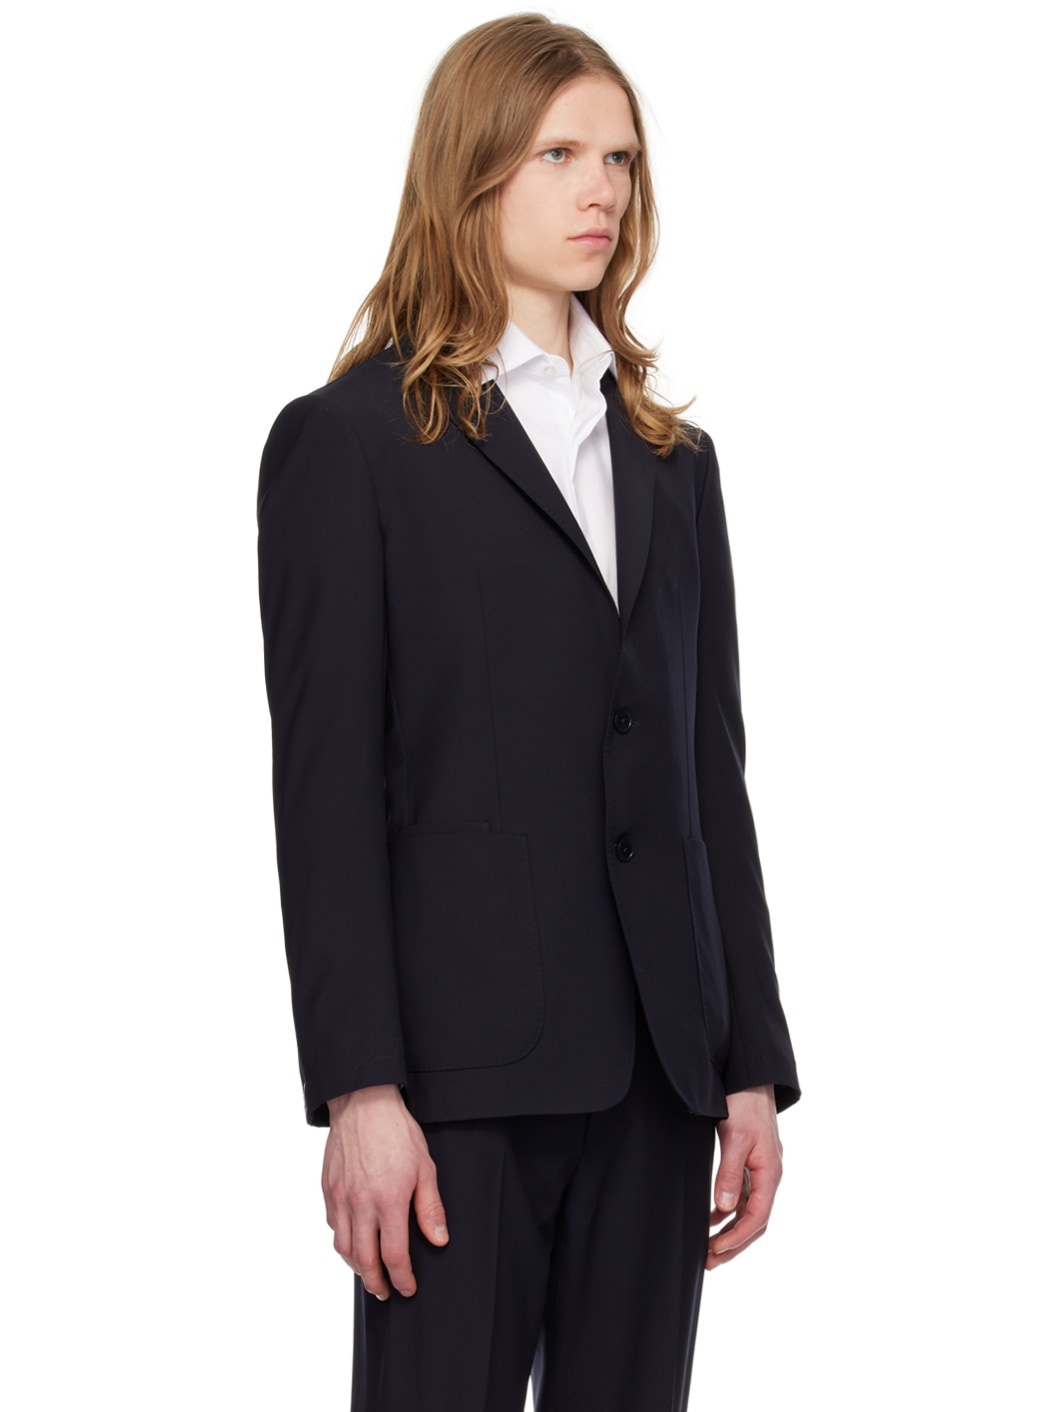 Navy Breathable Suit - 2